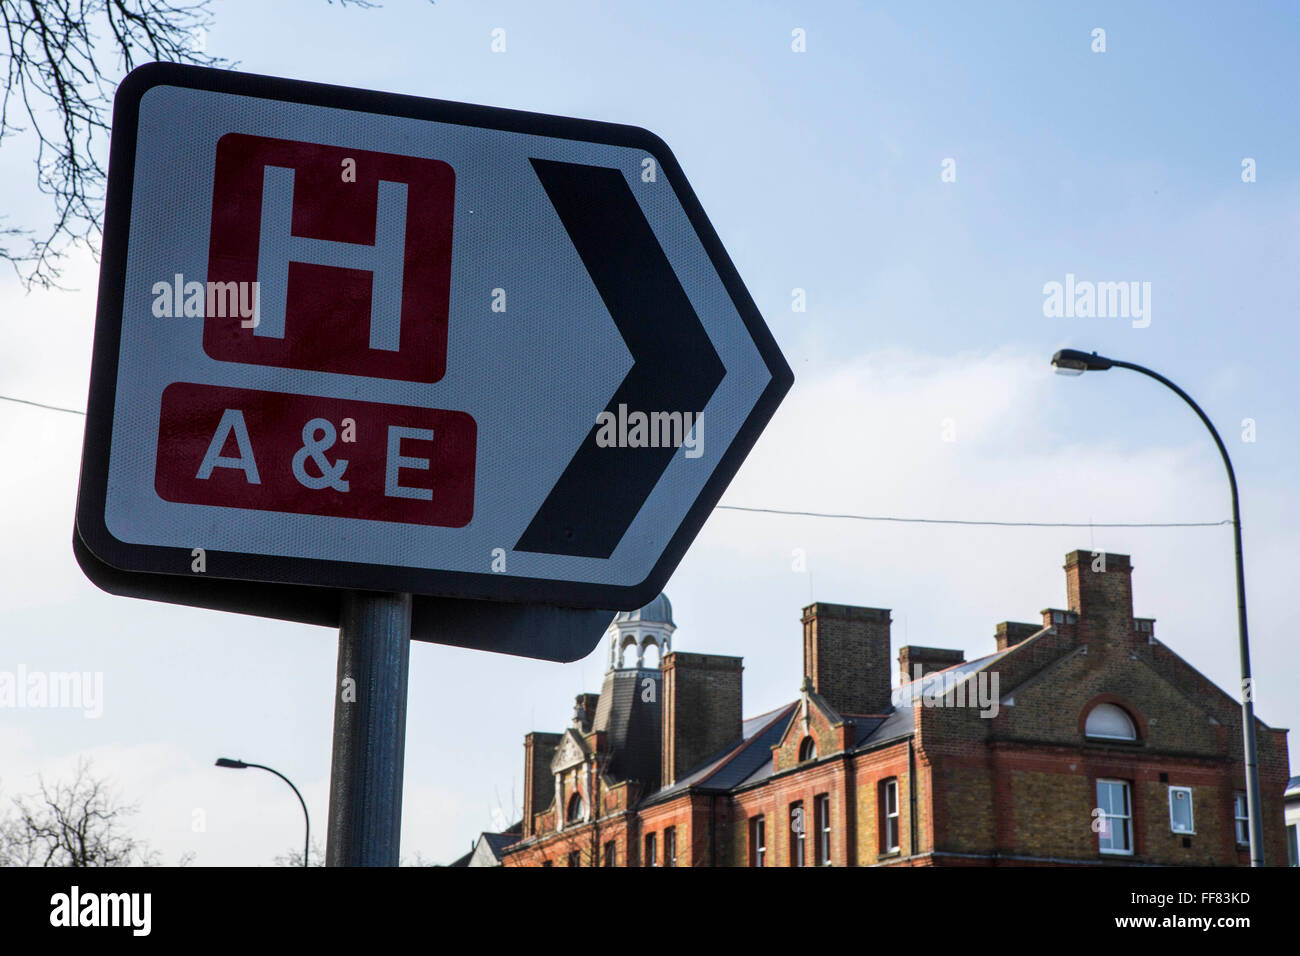 Road traffic sign directing people to an accident and emergency department in University Hospital Lewisham, London, UK. Stock Photo